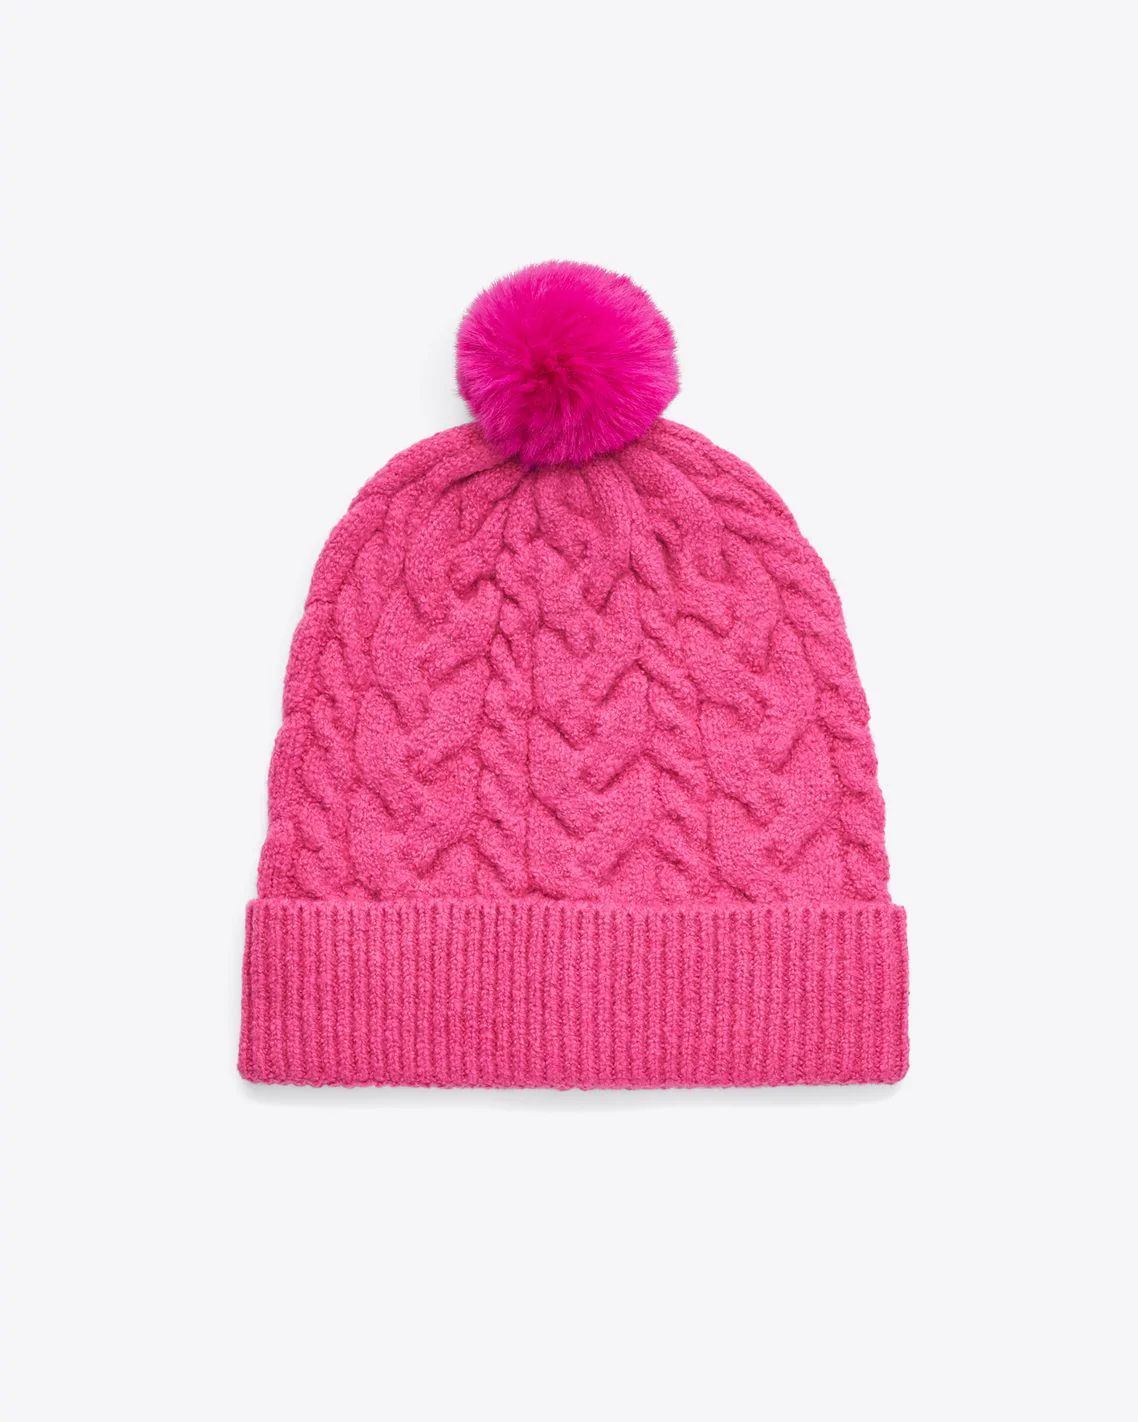 Cable Knit Hat with Pom Pom in Raspberry Pink | Draper James (US)